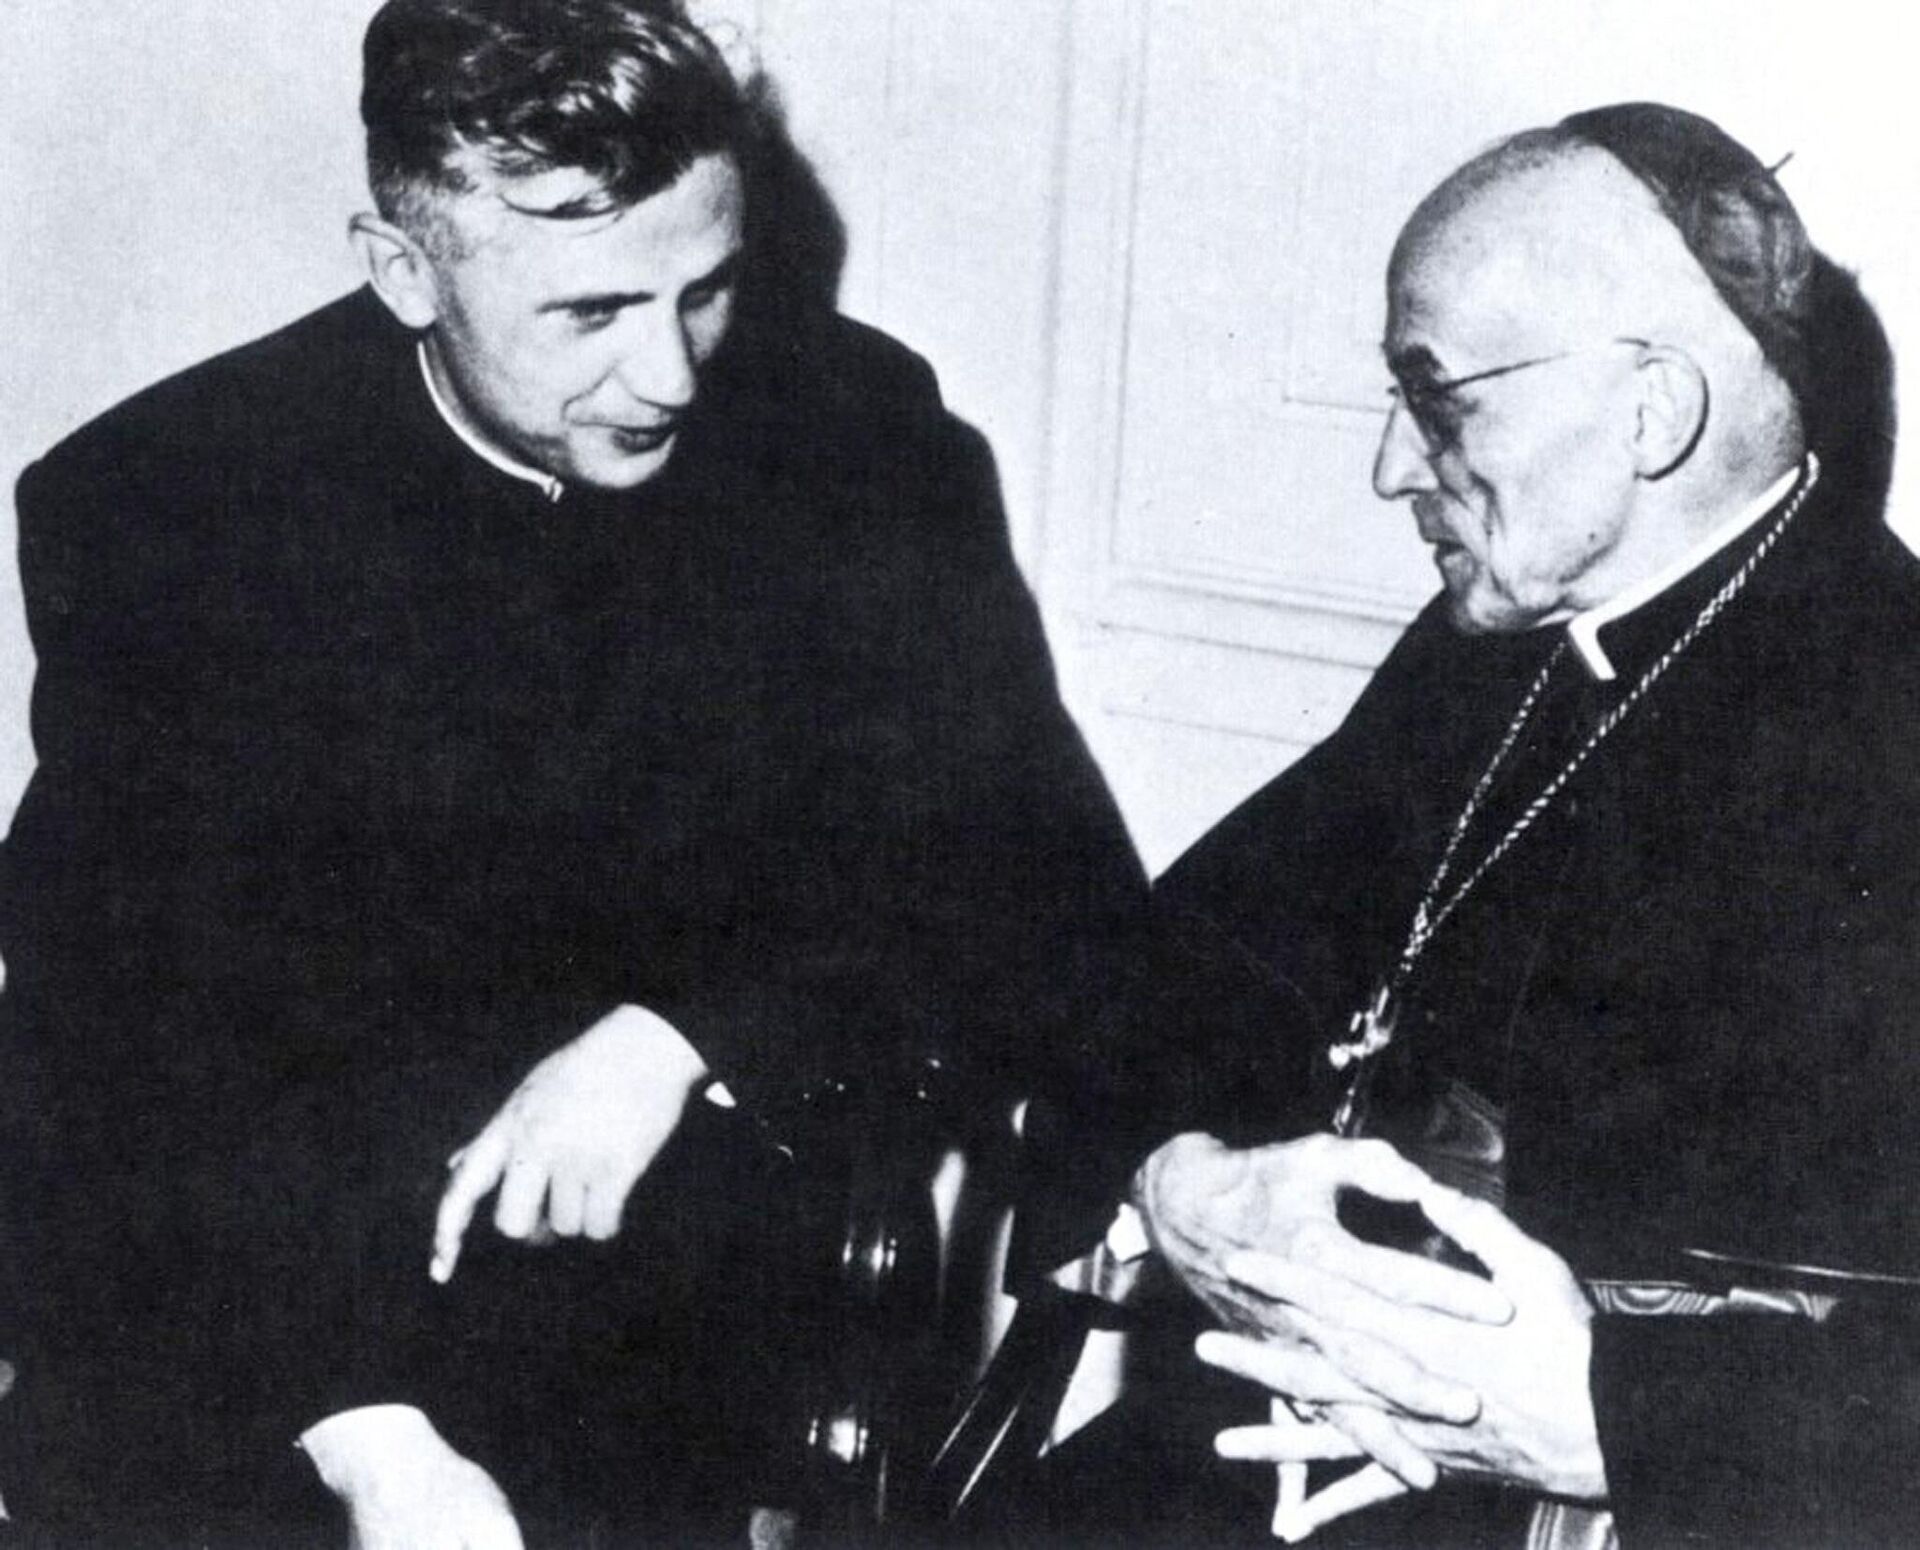 This file photo taken on January 1962 shows Josef Ratzinger (L), then professor of theology with Cologne's Cardinal Joseph Frings who took him as an advisor to the council at the Vatican. Germany's Cardinal Joseph Ratzinger was elected the 265th pope of the Roman Catholic Church on 19 April 2005 and took the name Benedict XVI. - Sputnik International, 1920, 31.12.2022